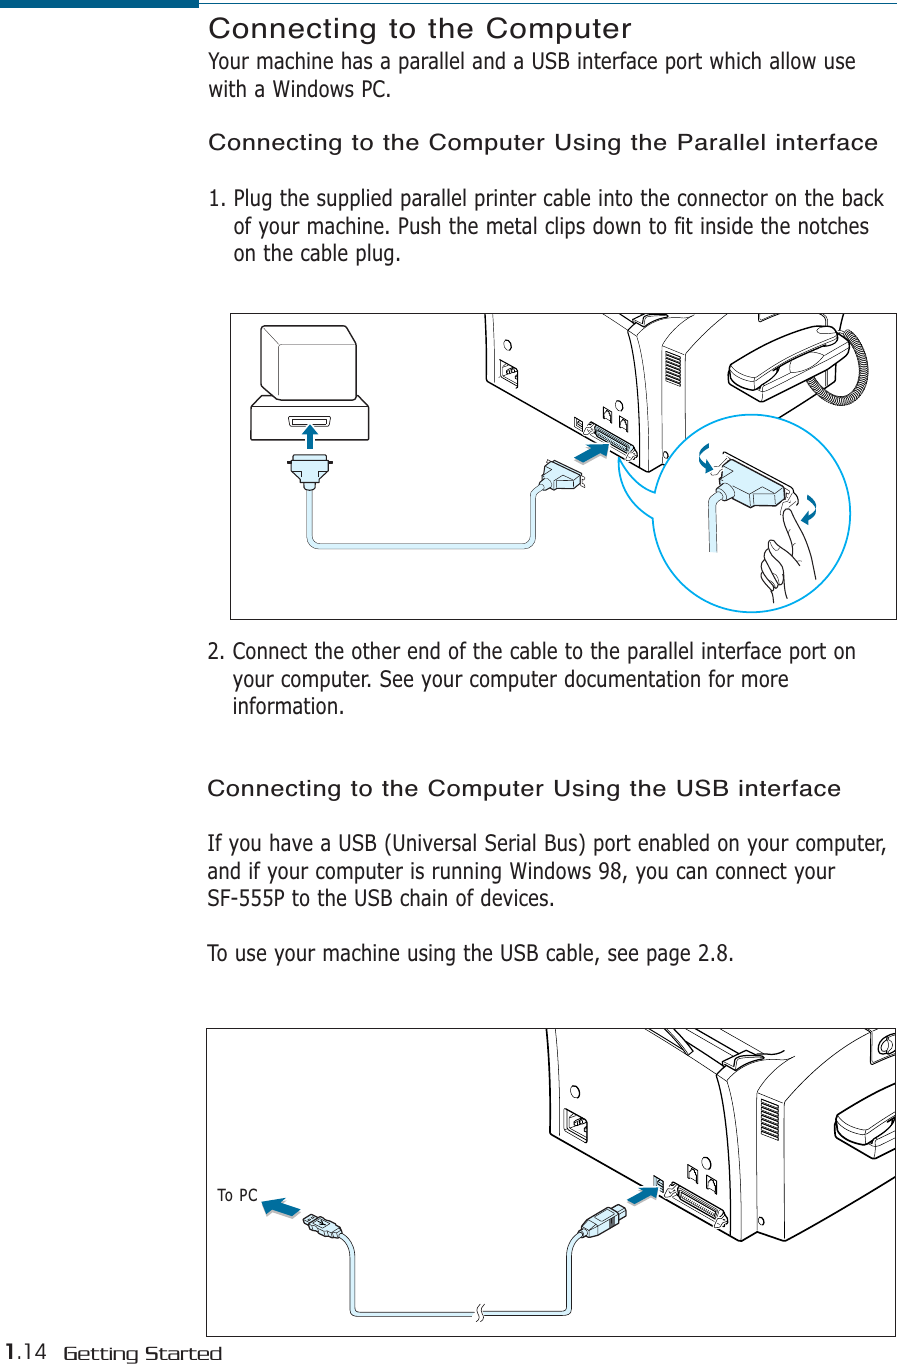 1.14 Getting StartedConnecting to the Computer Your machine has a parallel and a USB interface port which allow usewith a Windows PC. Connecting to the Computer Using the Parallel interface1. Plug the supplied parallel printer cable into the connector on the backof your machine. Push the metal clips down to fit inside the notcheson the cable plug.2. Connect the other end of the cable to the parallel interface port onyour computer. See your computer documentation for moreinformation.Connecting to the Computer Using the USB interfaceIf you have a USB (Universal Serial Bus) port enabled on your computer,and if your computer is running Windows 98, you can connect your SF-555P to the USB chain of devices.To use your machine using the USB cable, see page 2.8.000000000000000000000000000000000000000000000000000000000000000000000000000000000000000000000000000000000000000000000000000000000000000000To PC